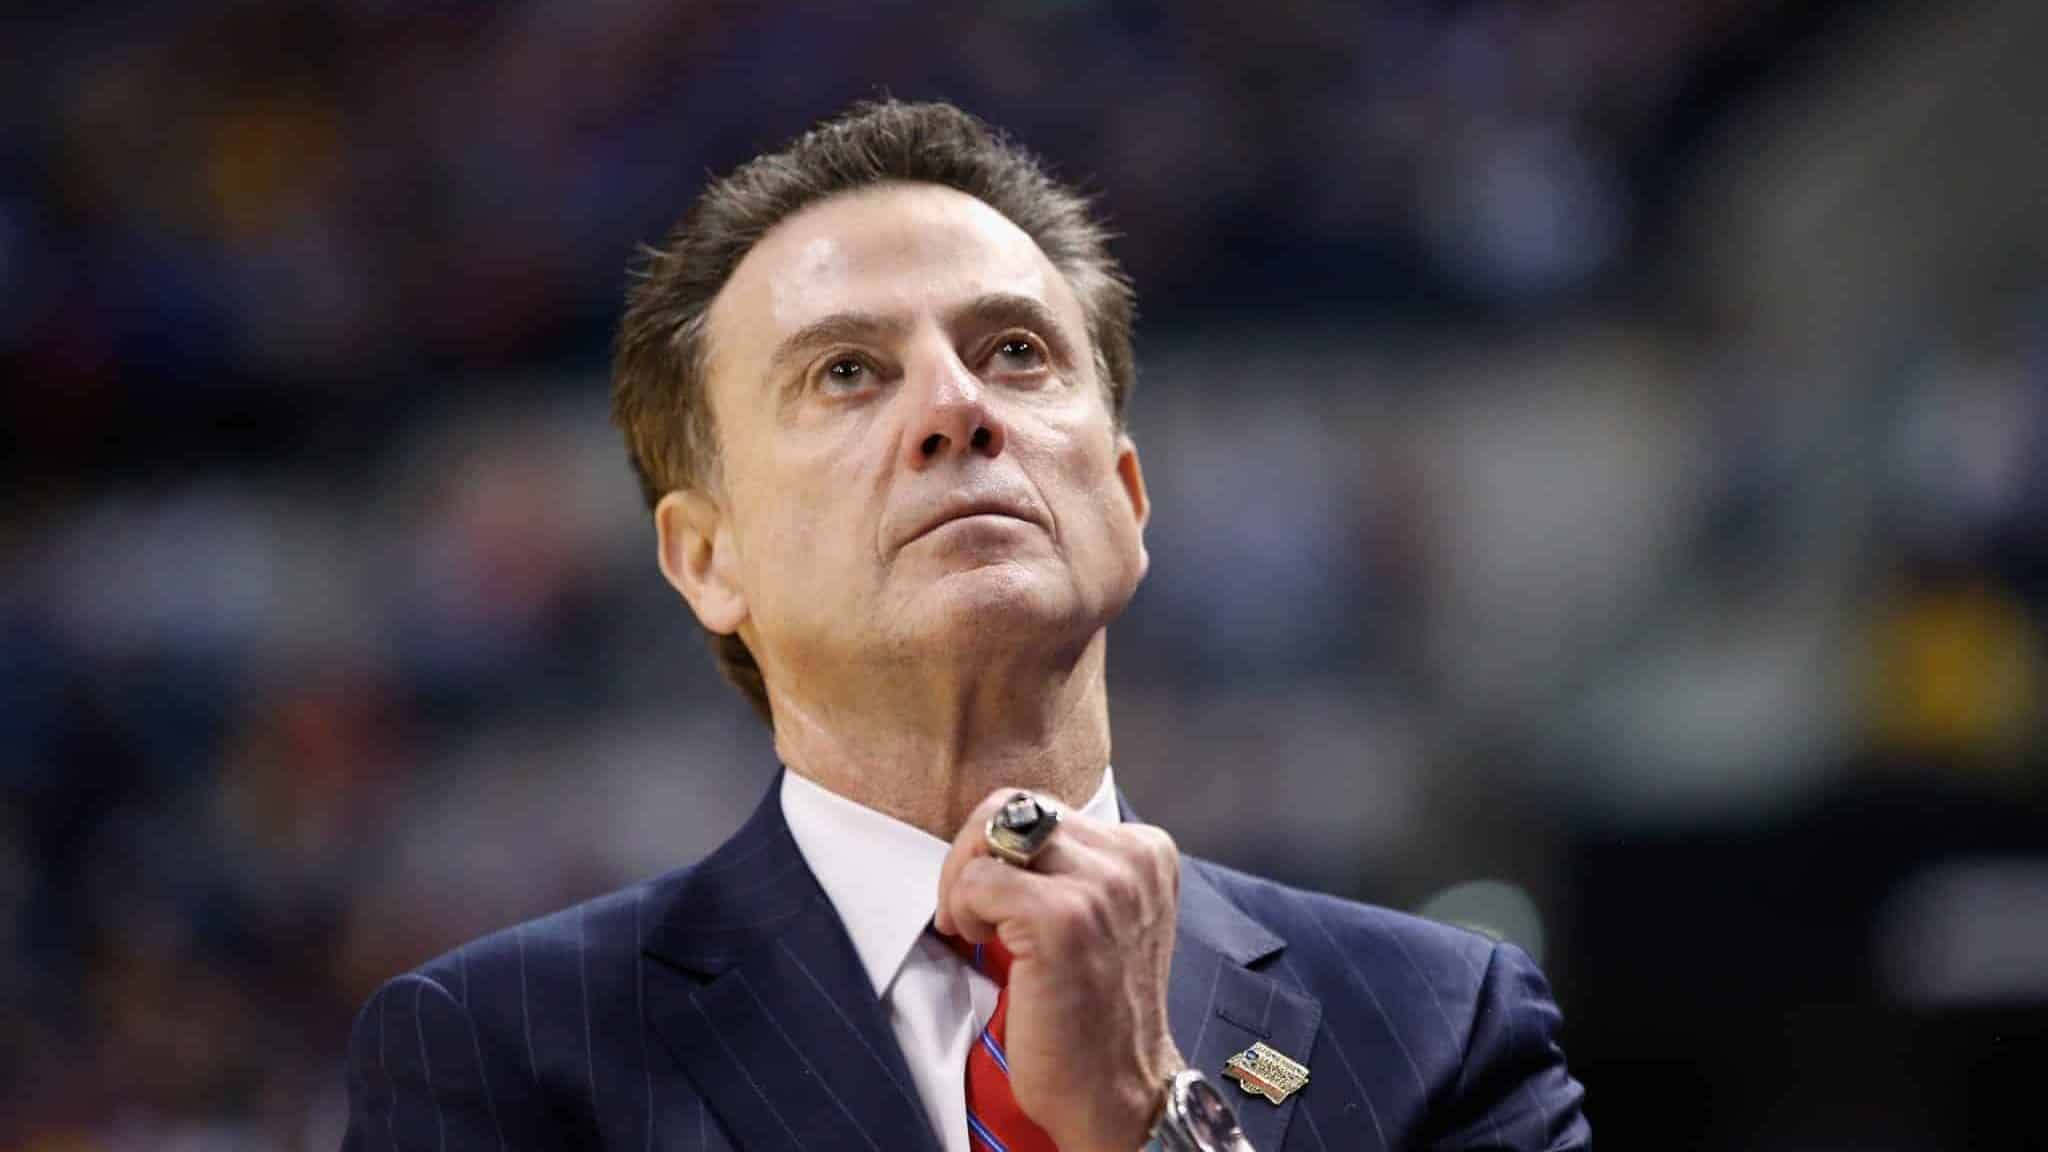 INDIANAPOLIS, IN - MARCH 19: Head coach Rick Pitino of the Louisville Cardinals reacts to their 69-73 loss to the Michigan Wolverines during the second round of the 2017 NCAA Men's Basketball Tournament at the Bankers Life Fieldhouse on March 19, 2017 in Indianapolis, Indiana.